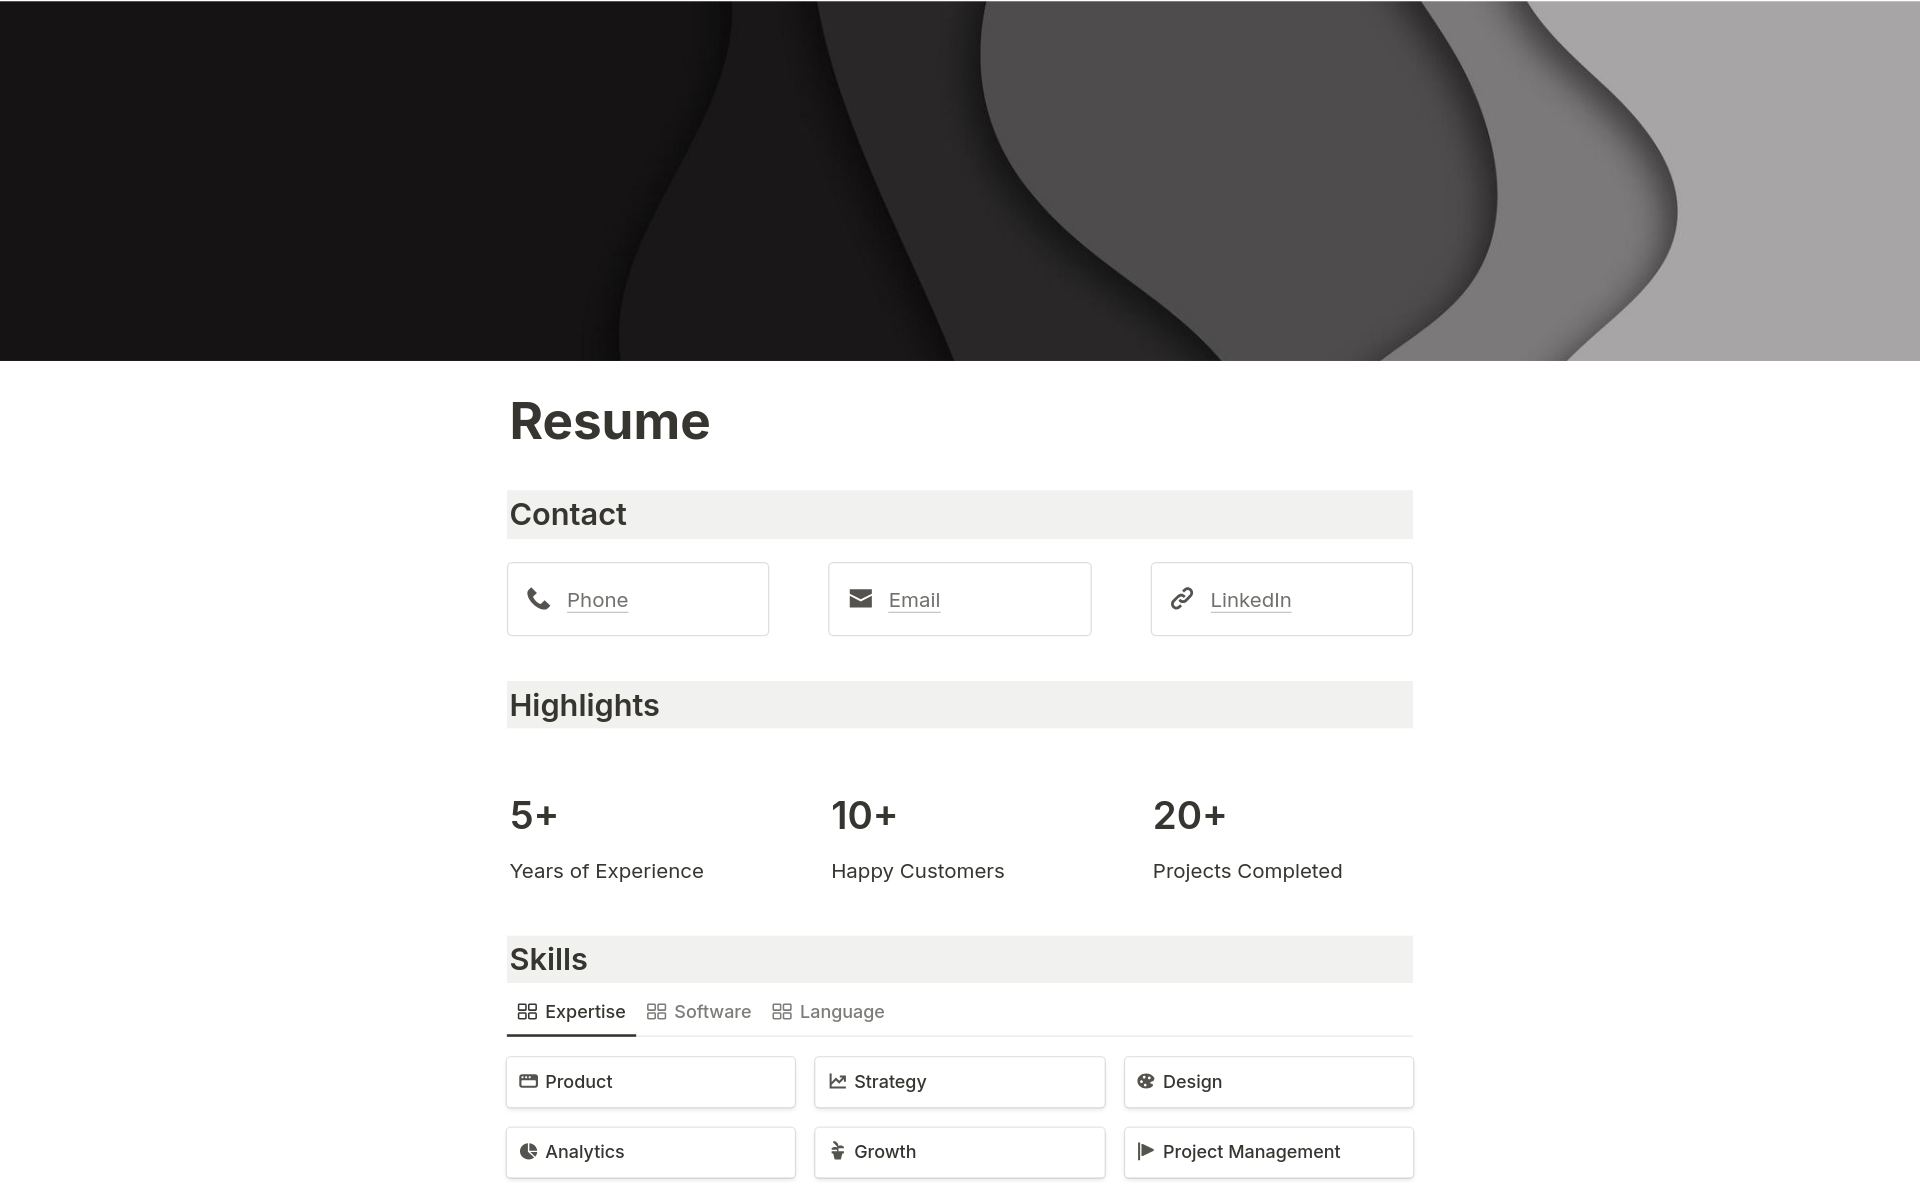 Are you a job seeker looking for the perfect resume? With this template, you can build and publish a minimal & functional resume on Notion within minutes.